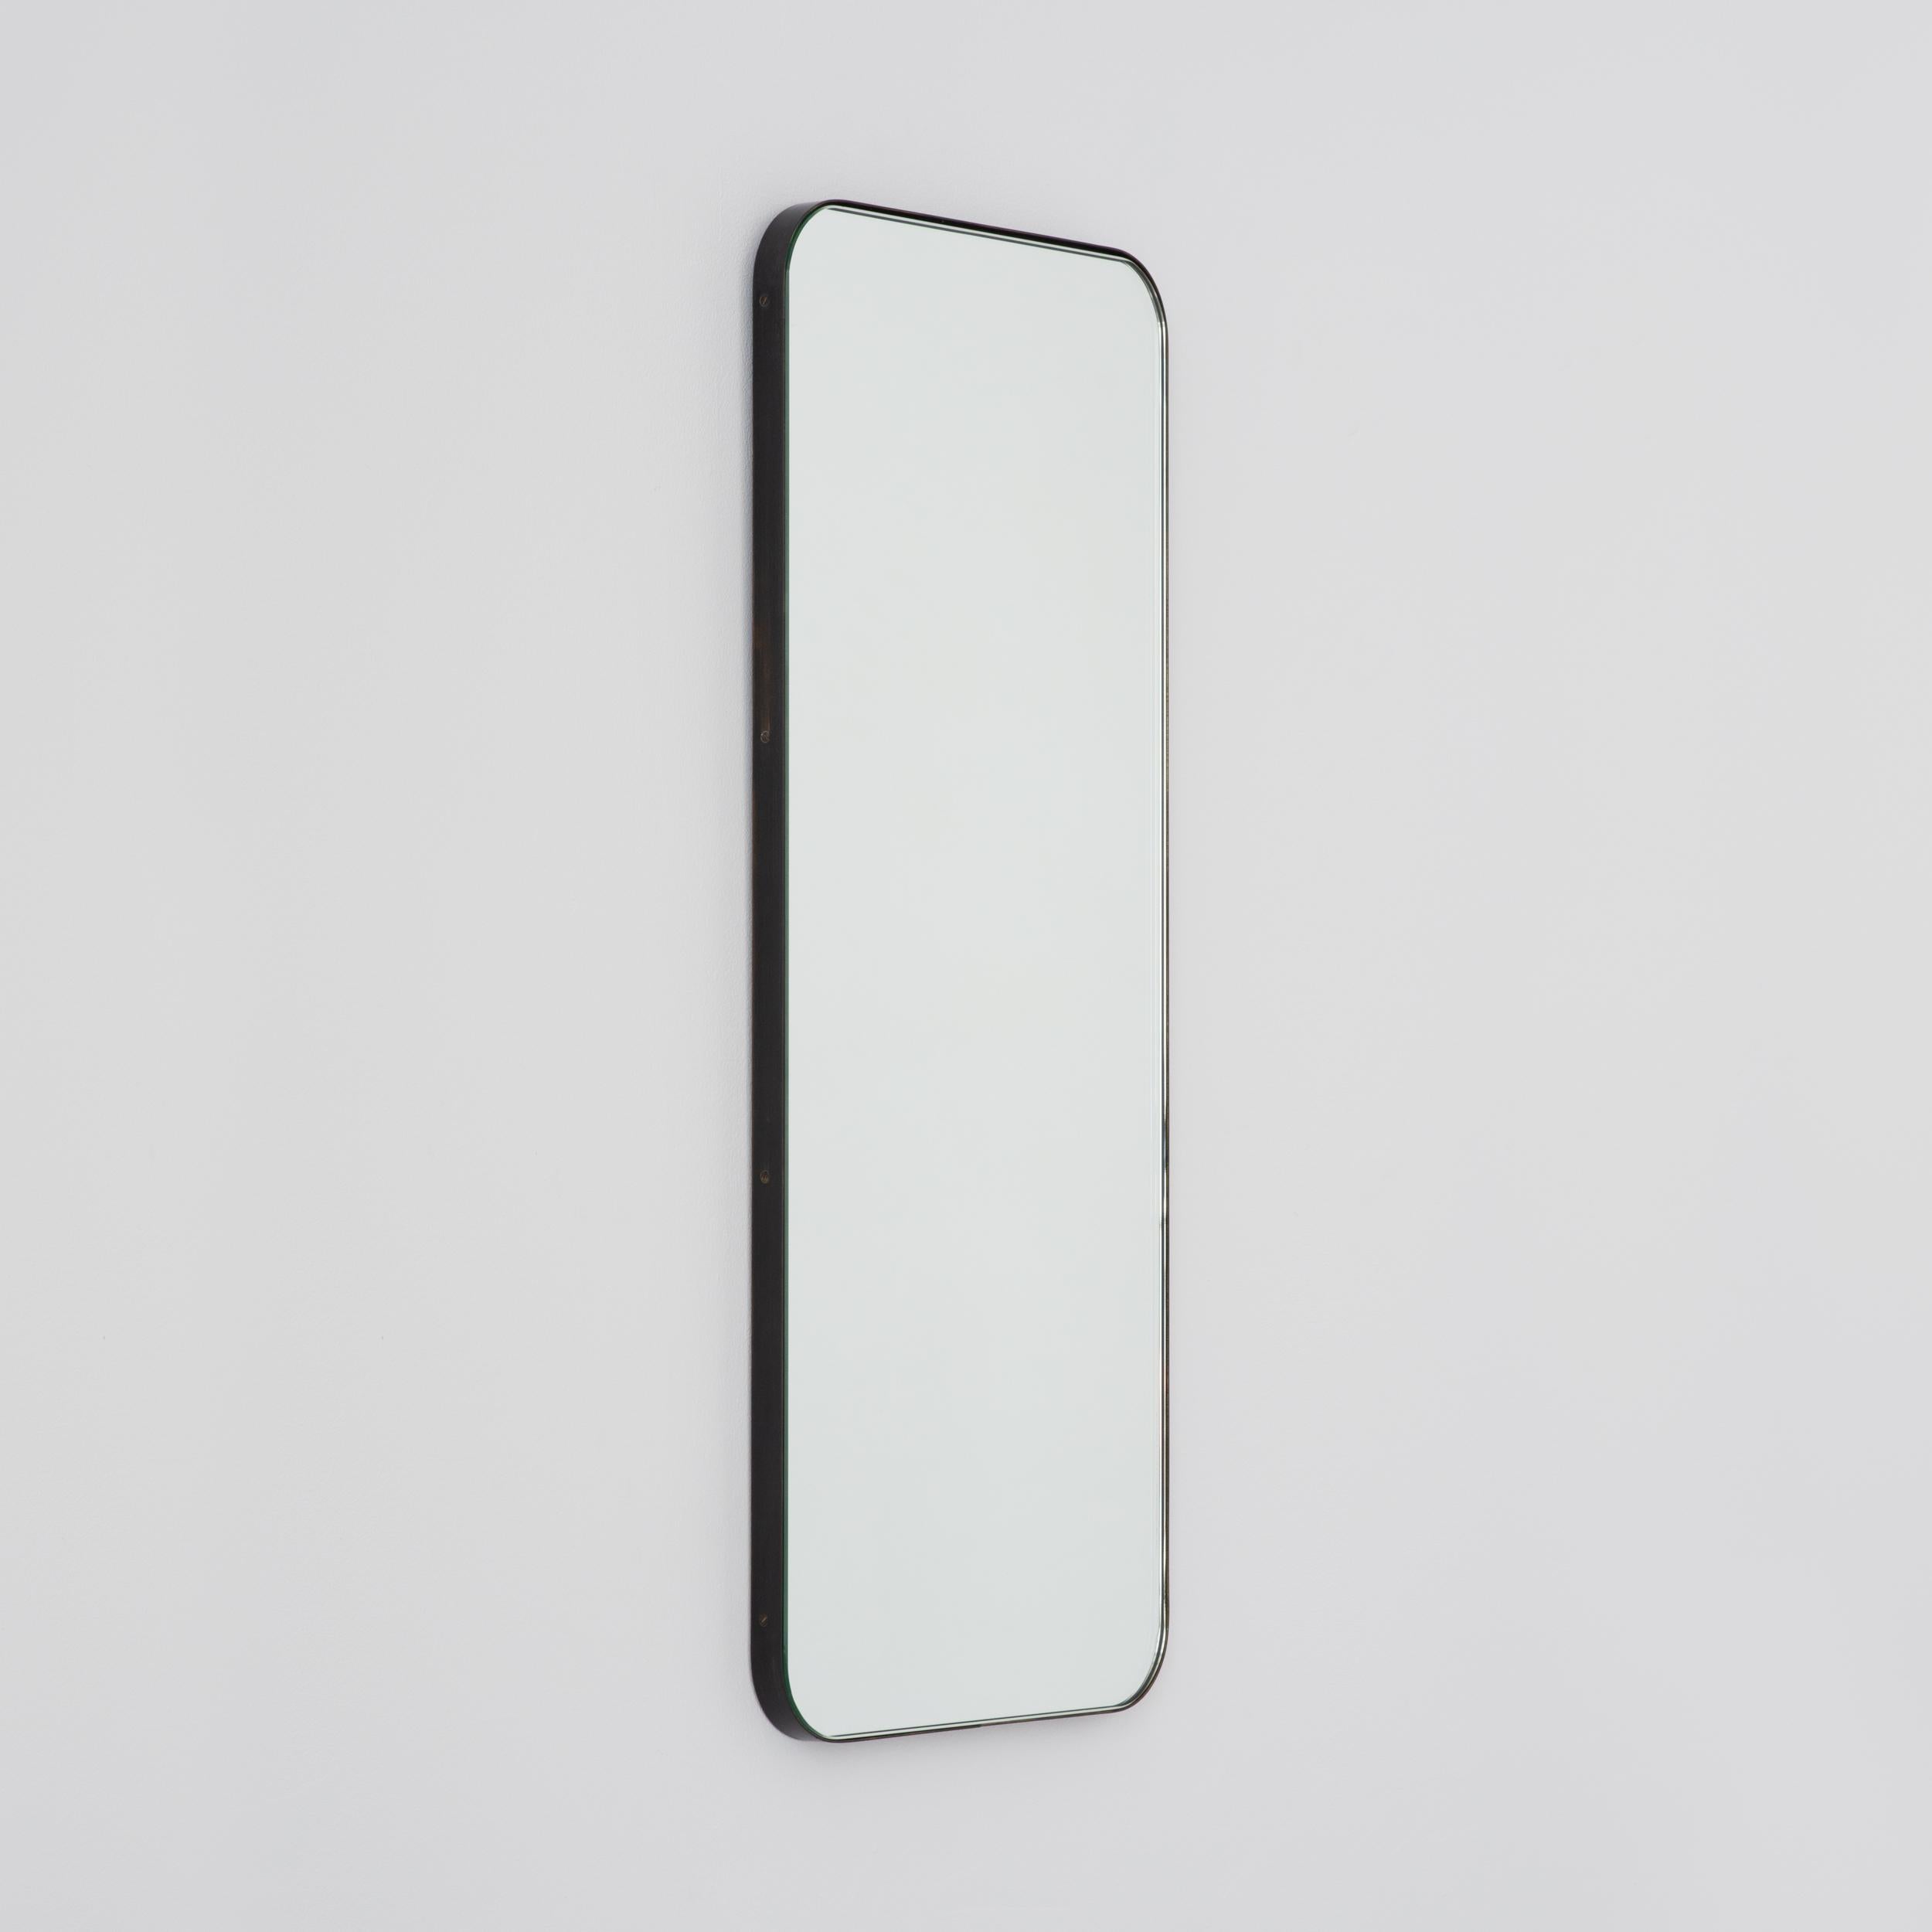 Our mirrors are designed with an integrated French cleat (split batten) system that ensures the mirror is securely mounted flush with the wall. An alternative hanging hook or a Z-bar (depending on the size of the mirror) is available on demand for